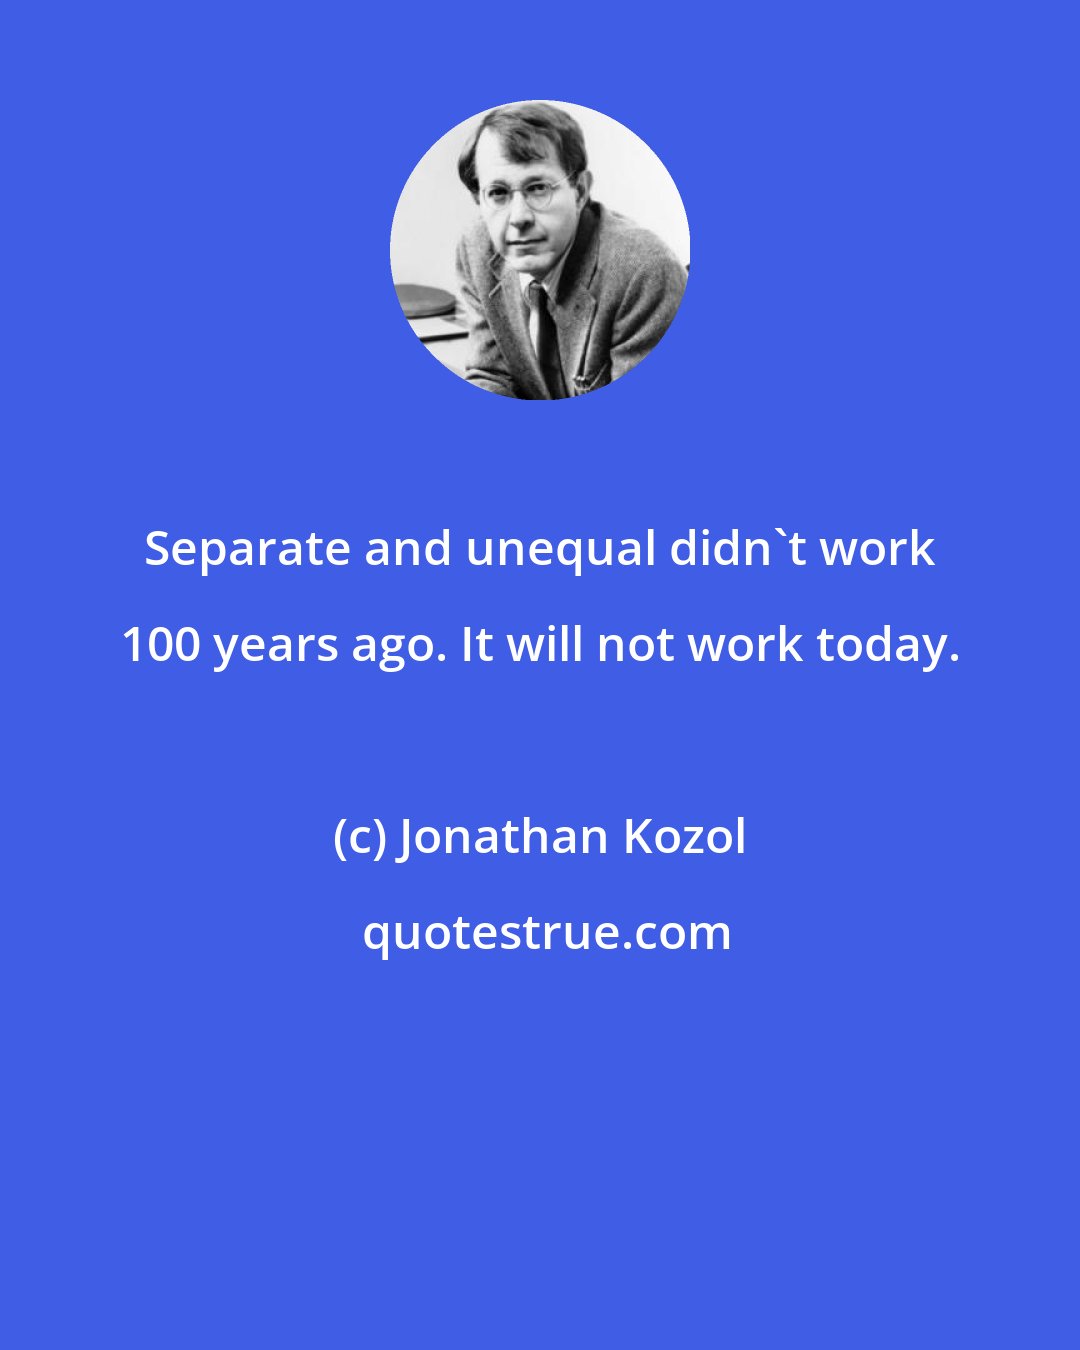 Jonathan Kozol: Separate and unequal didn't work 100 years ago. It will not work today.